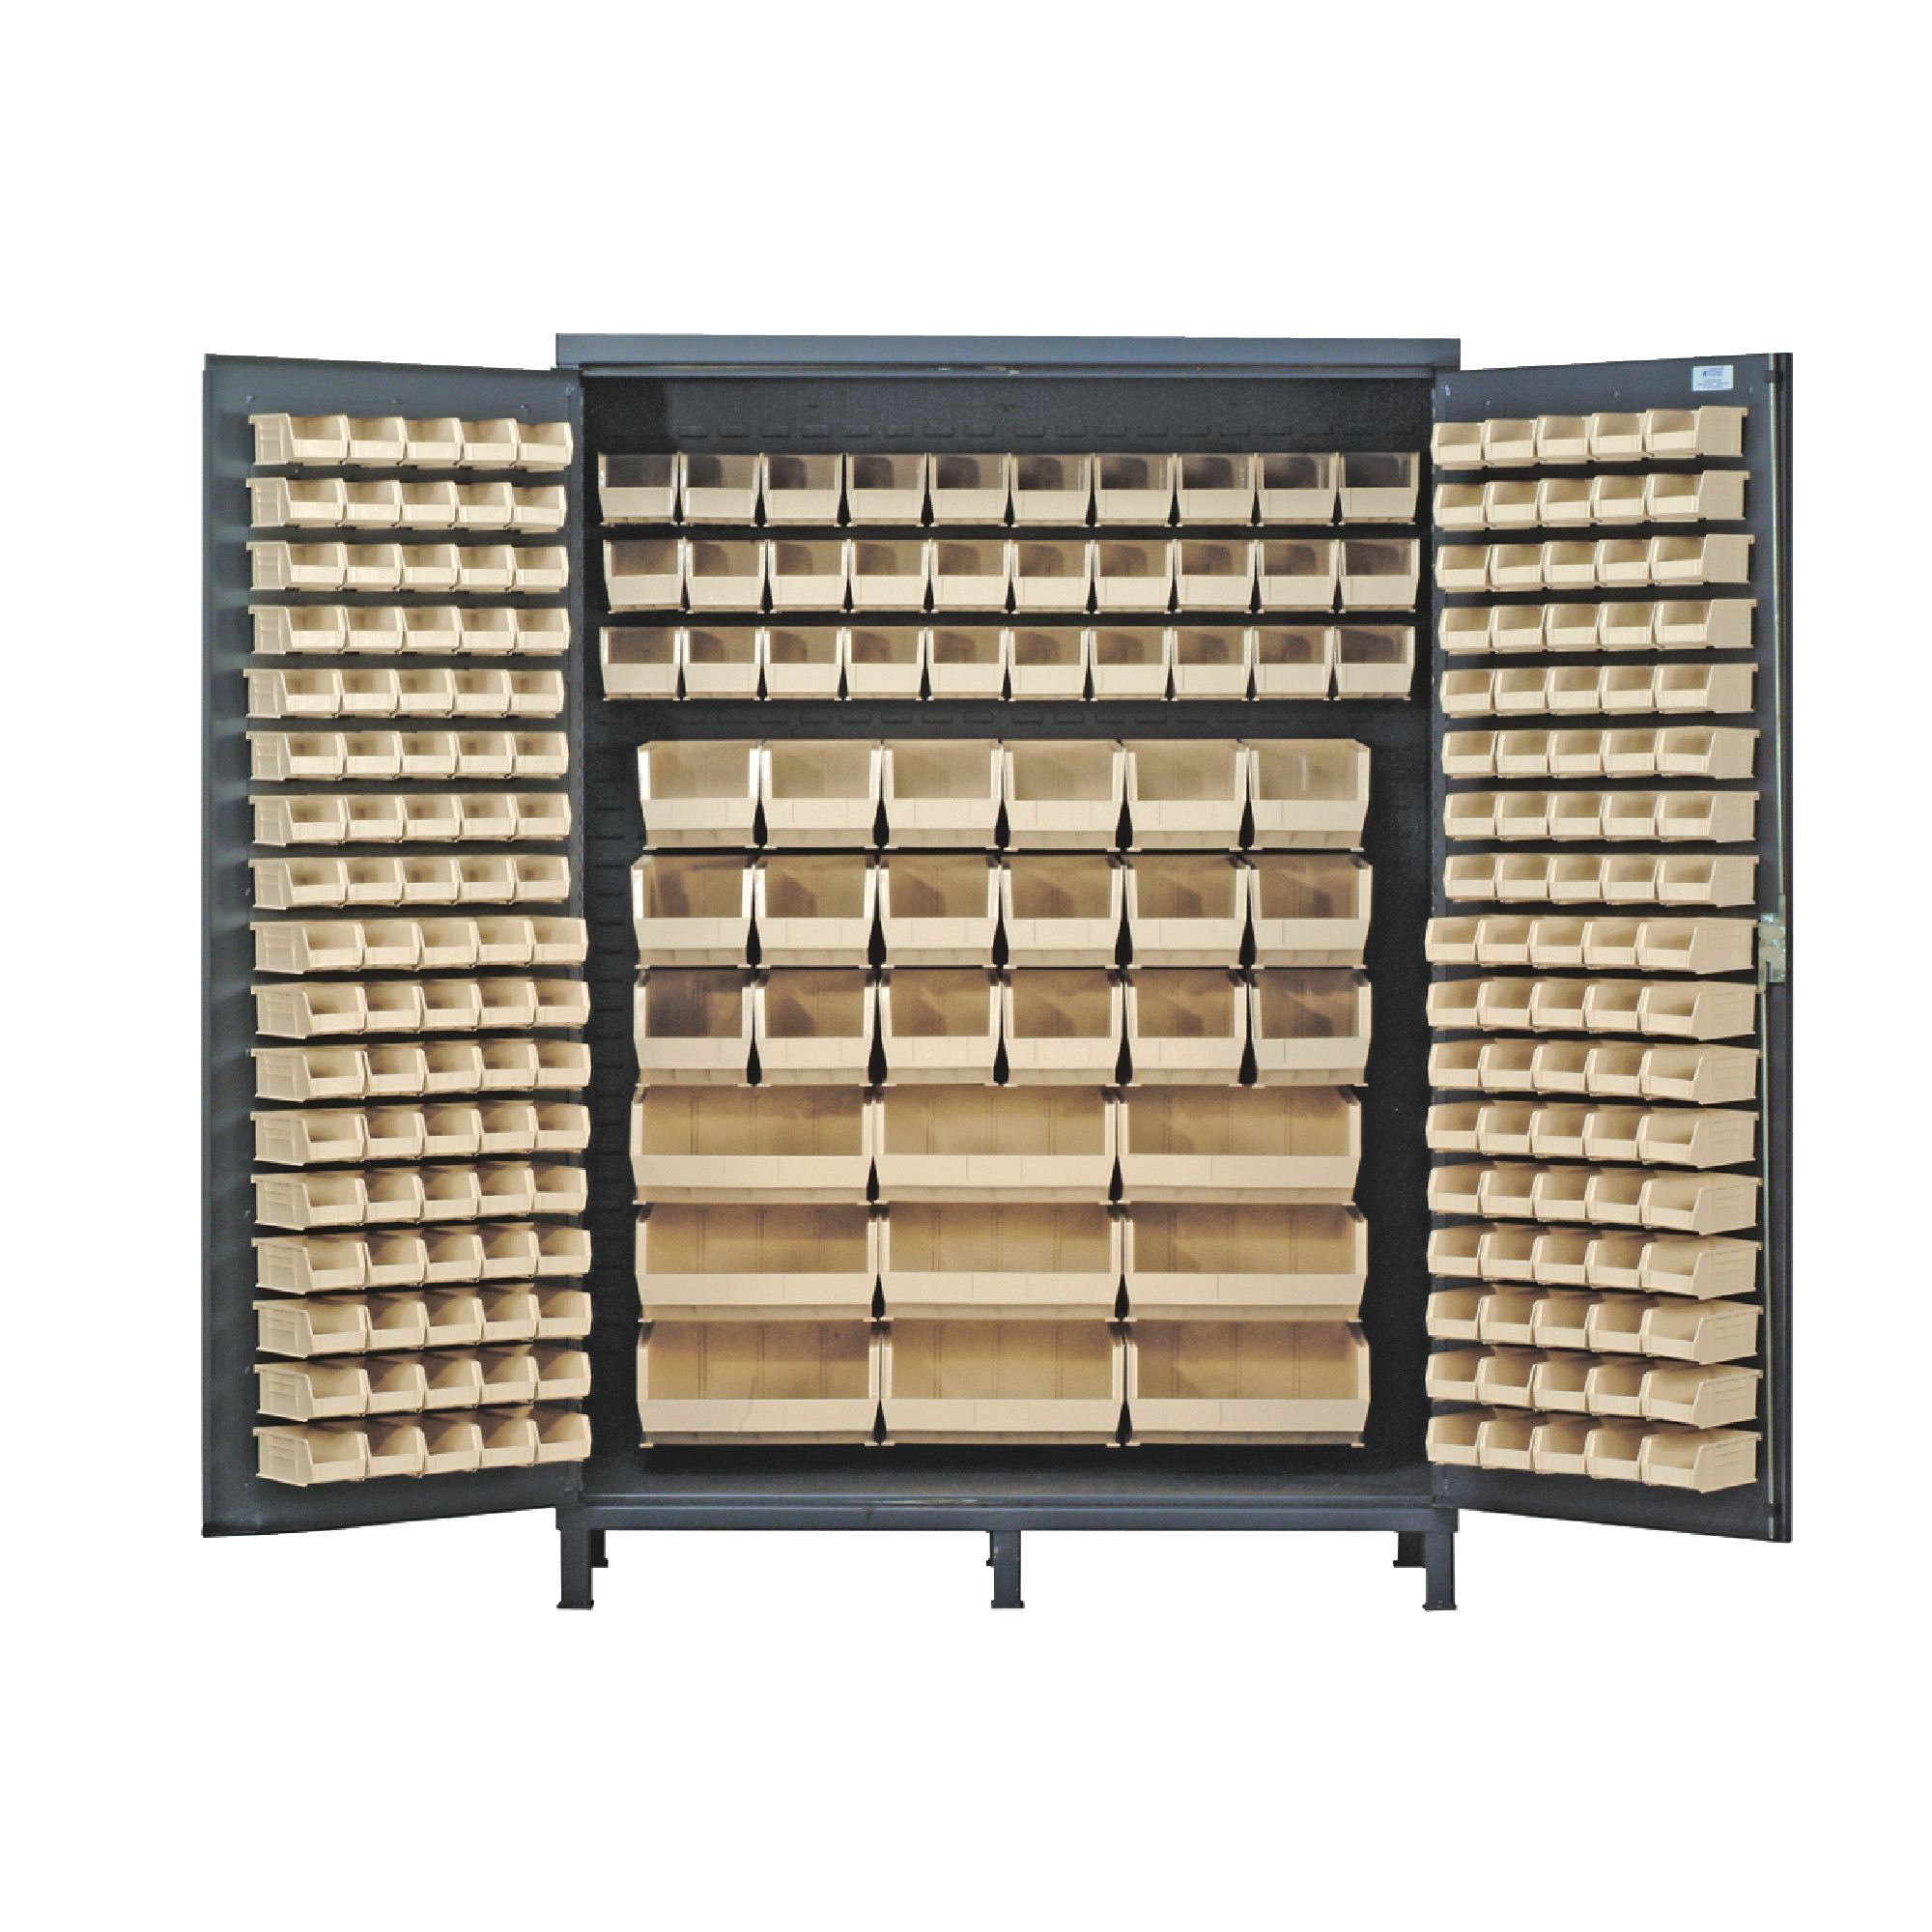 QUANTUM STORAGE SYSTEMS 60" Super Wide Colossal Heavy-Duty Floor Cabinet With 227 Ivory Bins